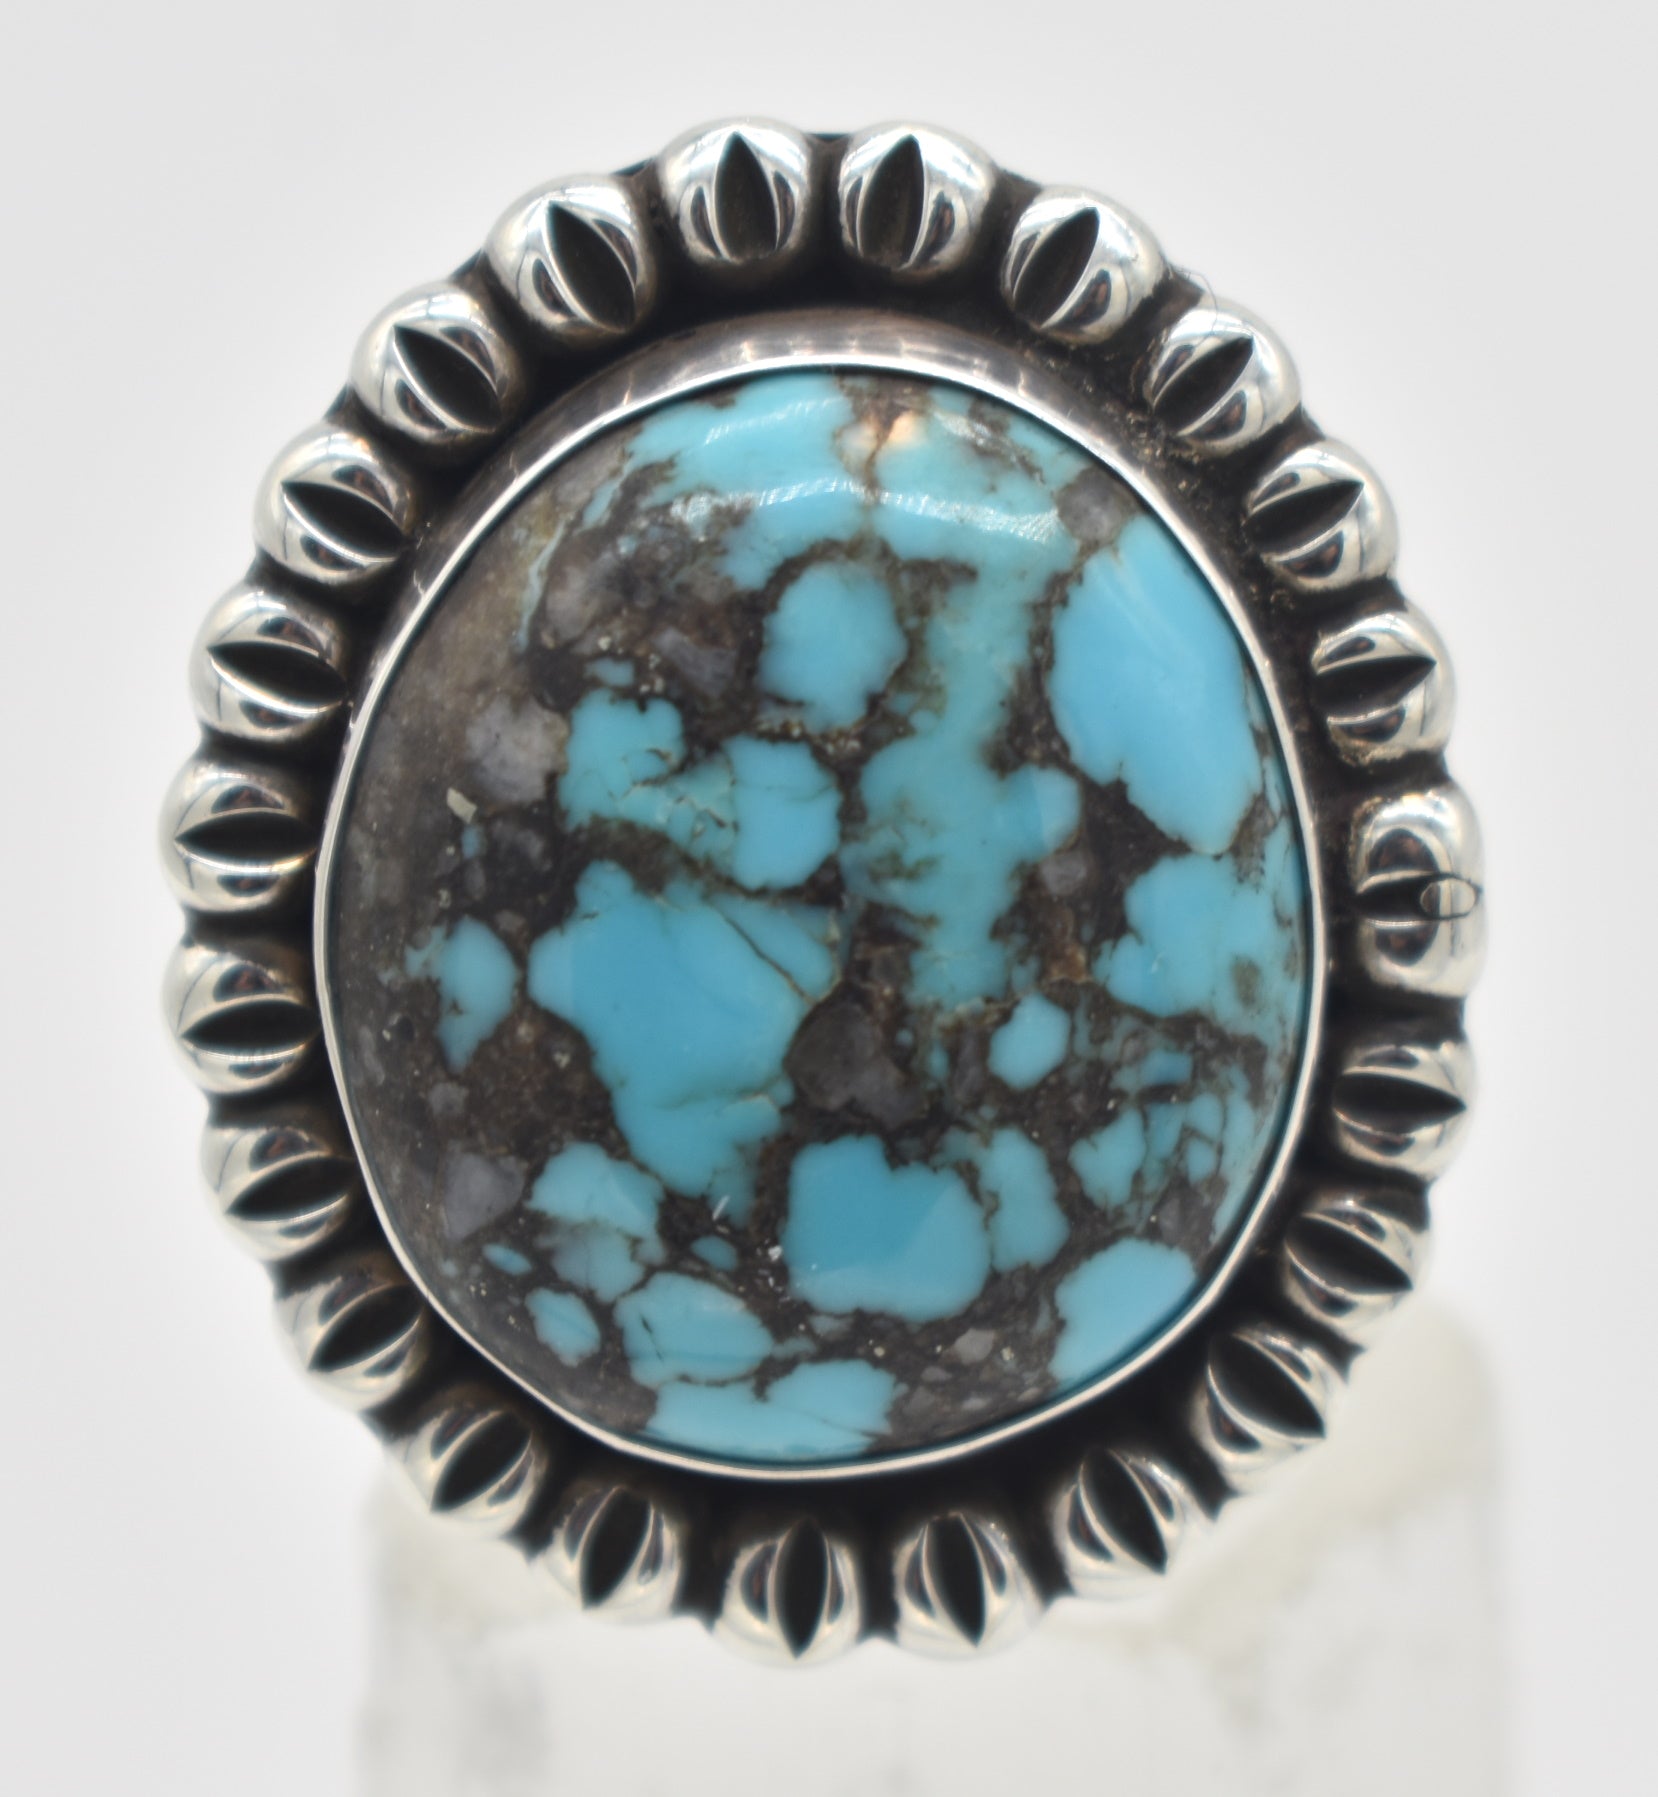 Ernest Wood Navajo Sterling Silver Turquoise Statement Ring - Size 13